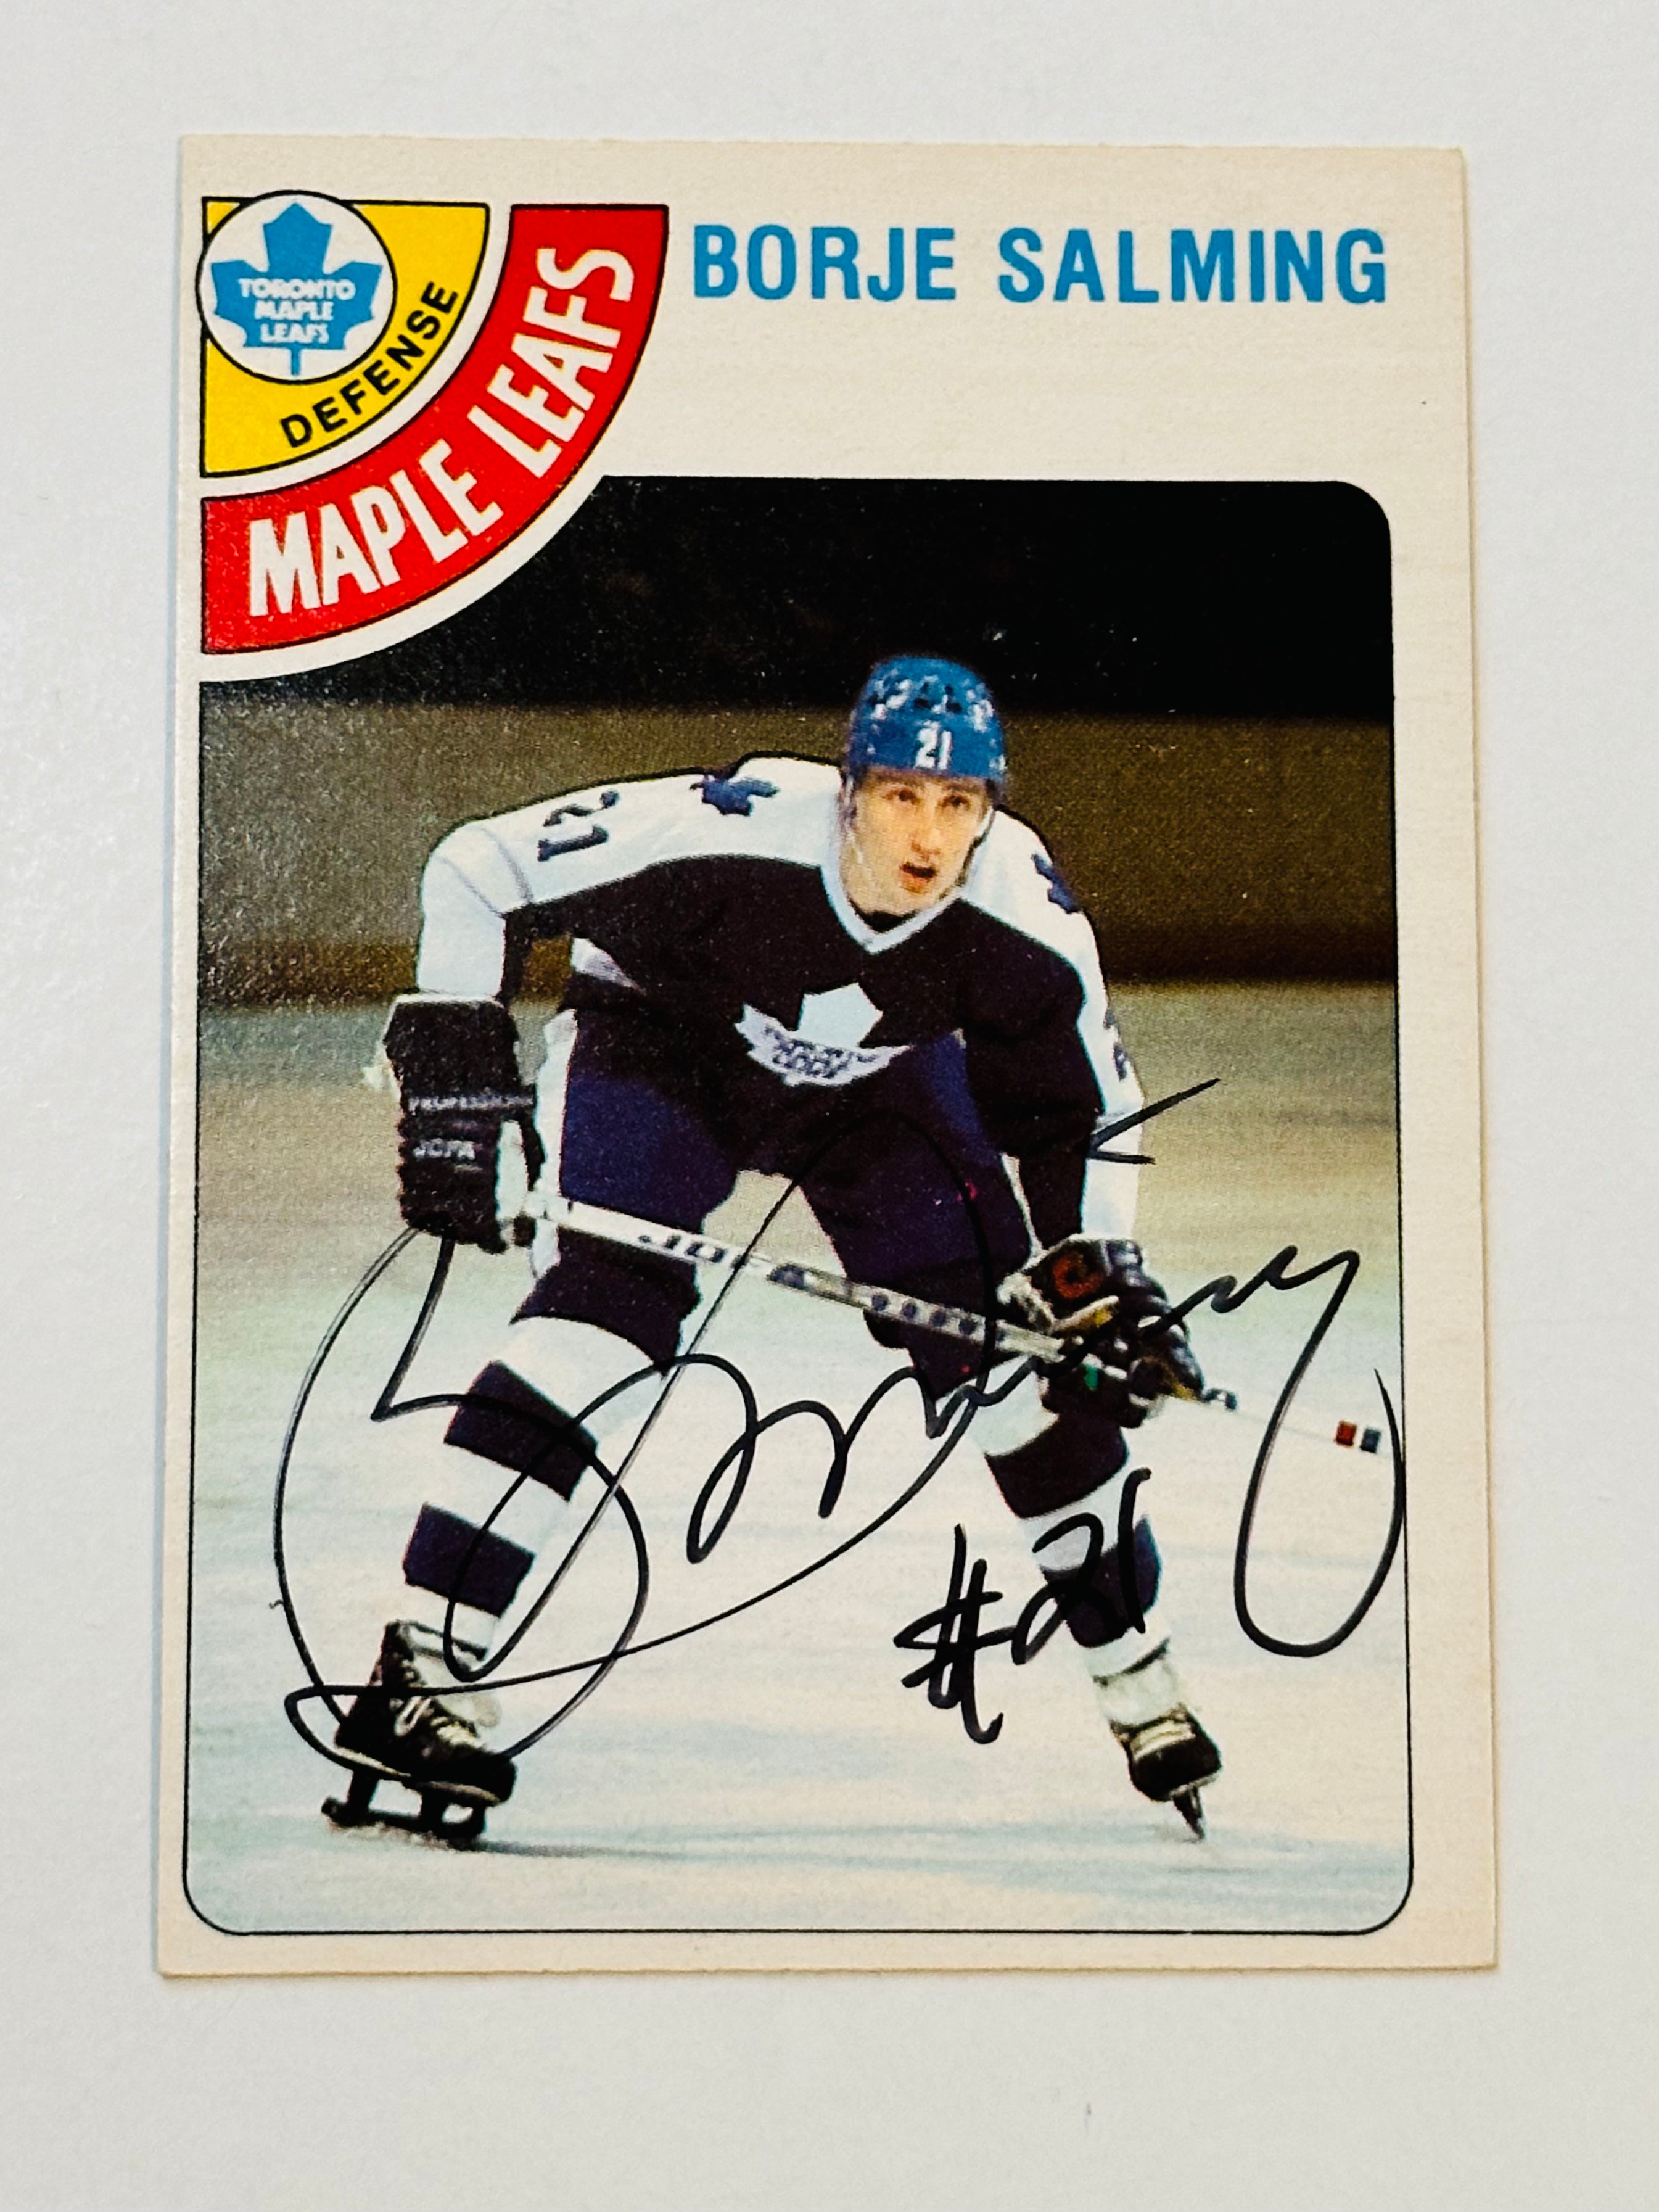 Borje Salming Toronto Maple Leafs hockey legend signed in person card with COA